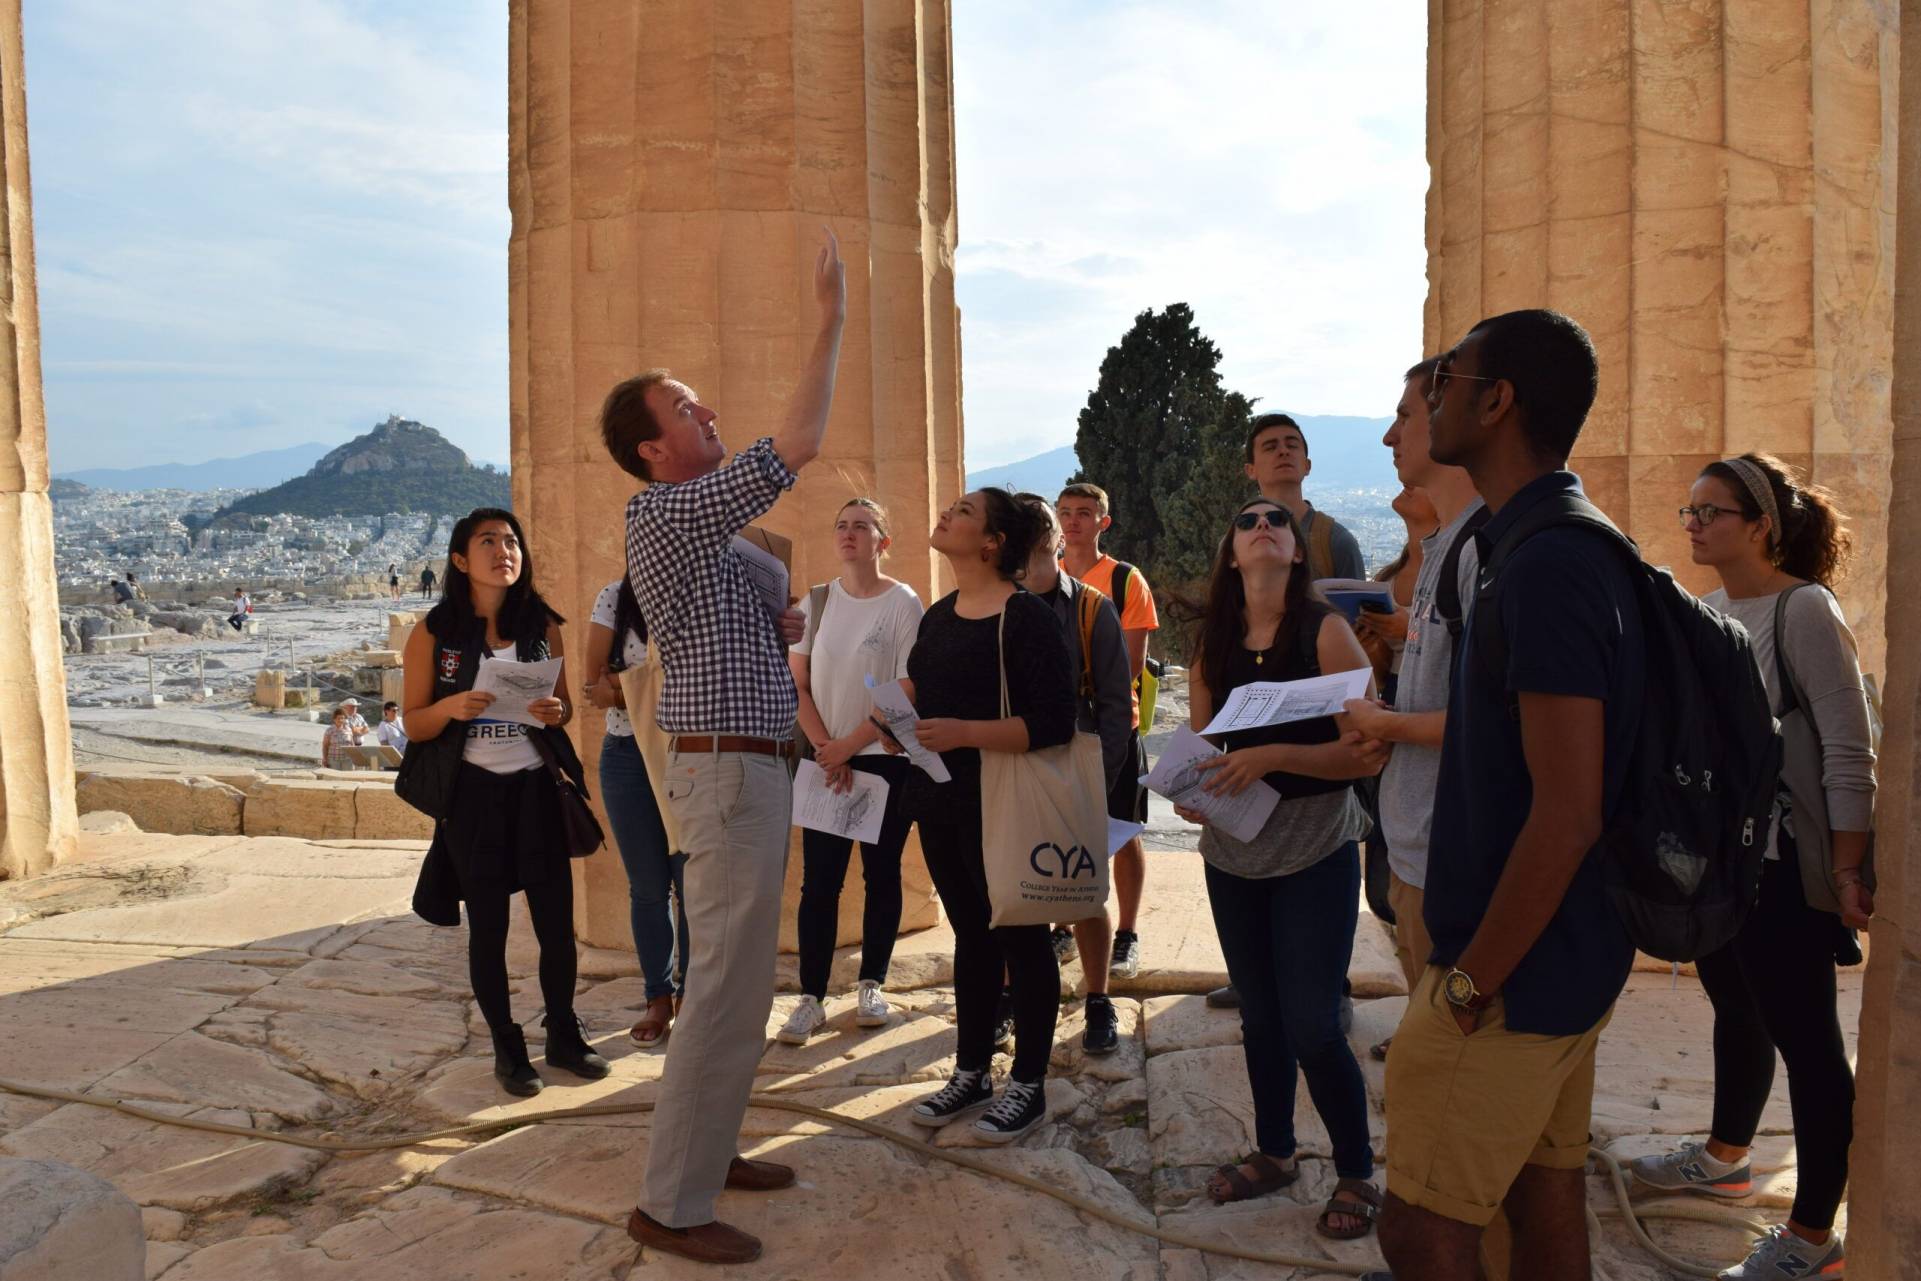 At the Intersection of Past and Future 2. Students of the Topography of Athens class get the rare opportunity to visit the inside of the Parthenon which is closed for the public scaled